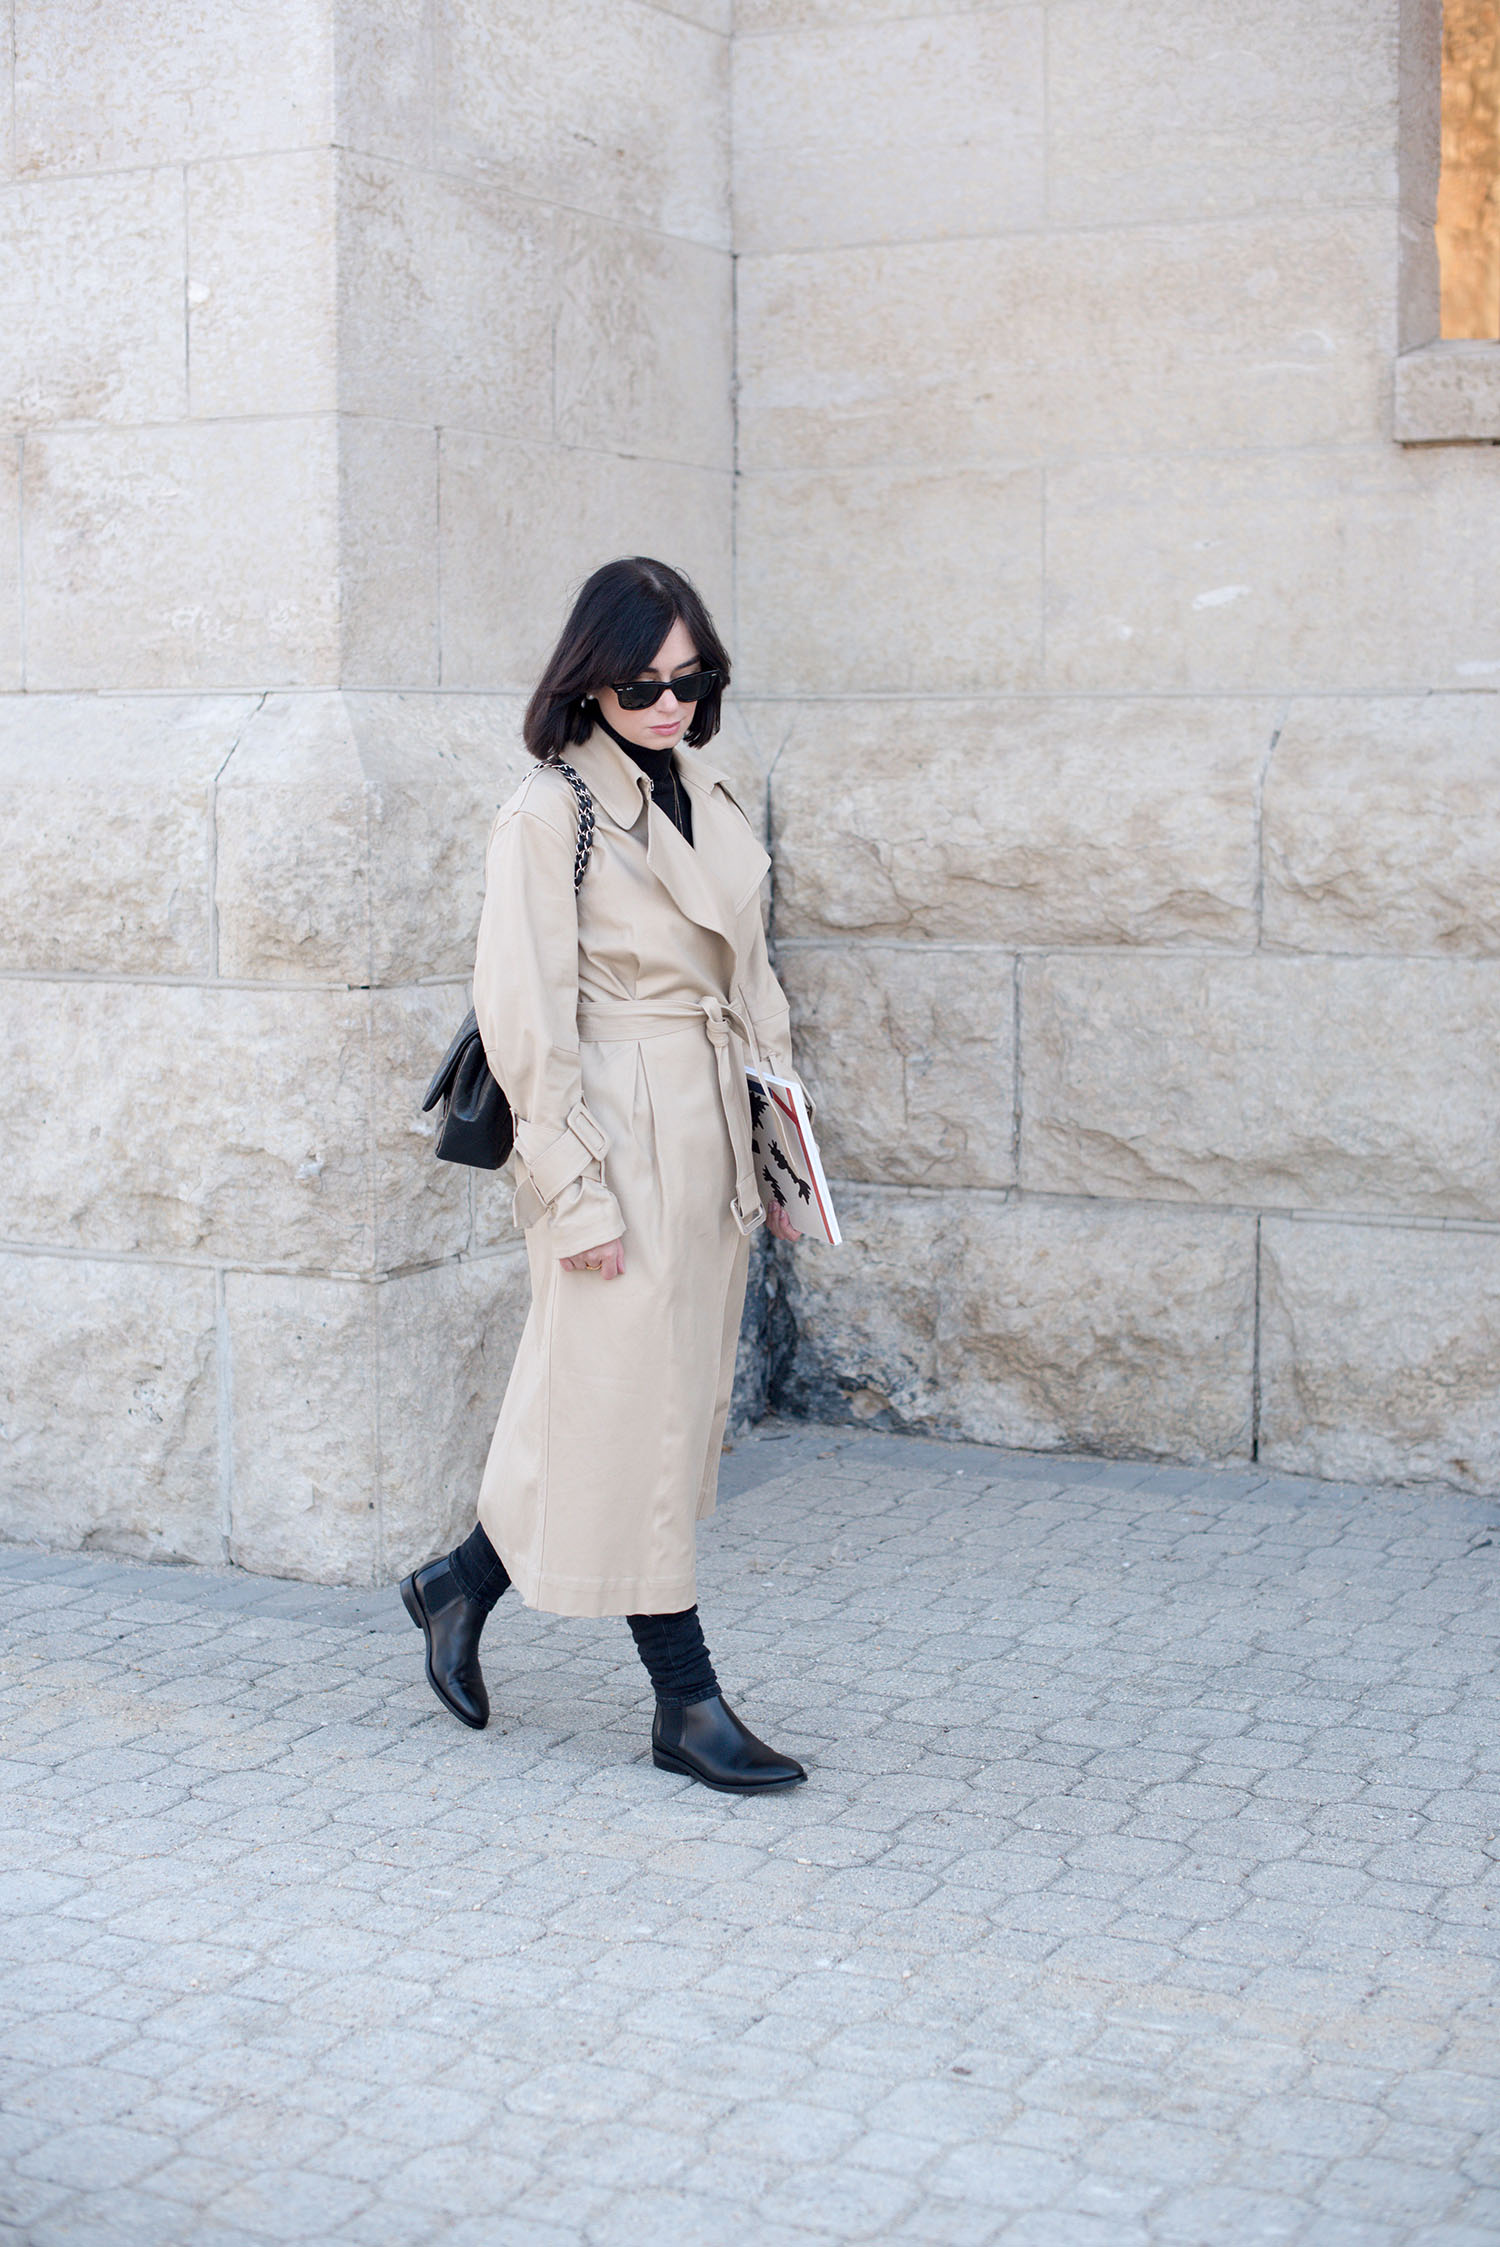 Top Winnipeg fashion blogger Cee Fardoe of Coco & Vera wears an H&M trench coat and Everyone Chelsea boots at St. Boniface Cathedral